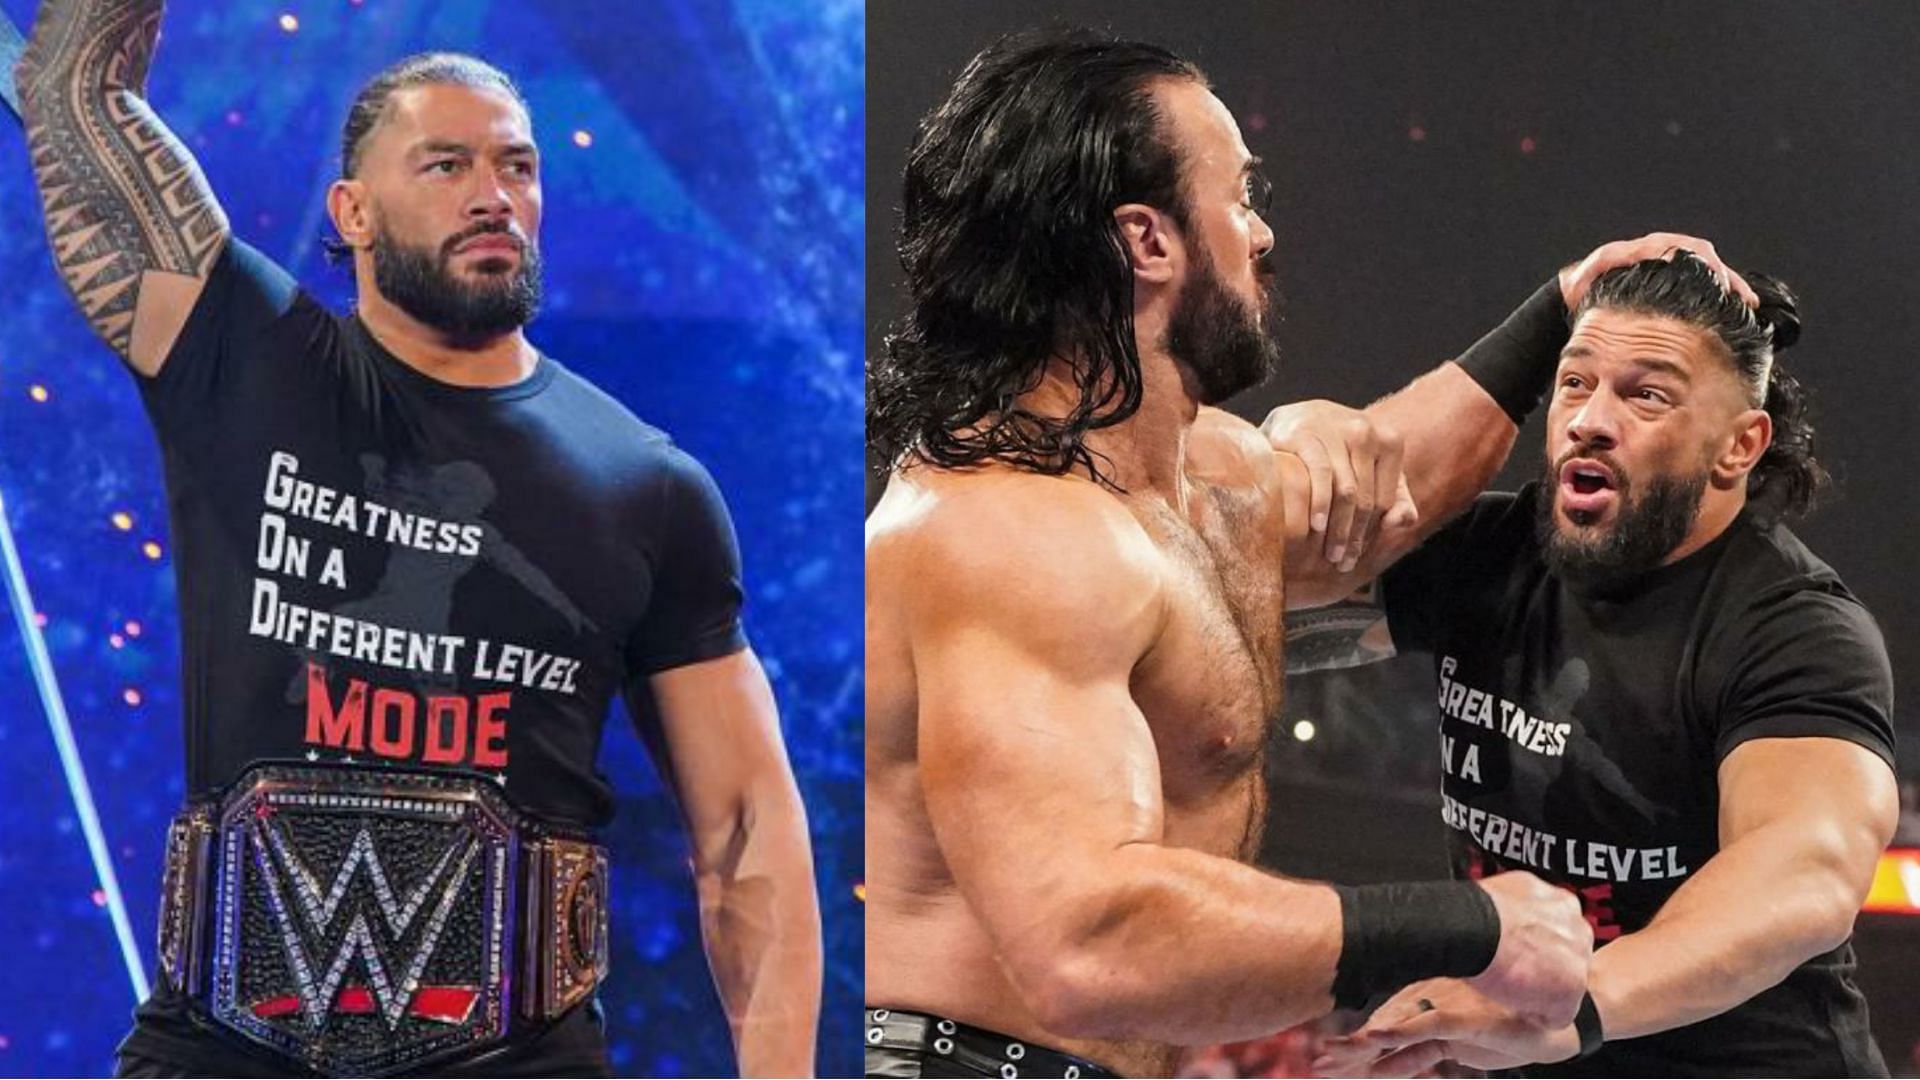 Multiple challengers have been rumored for Roman Reigns.